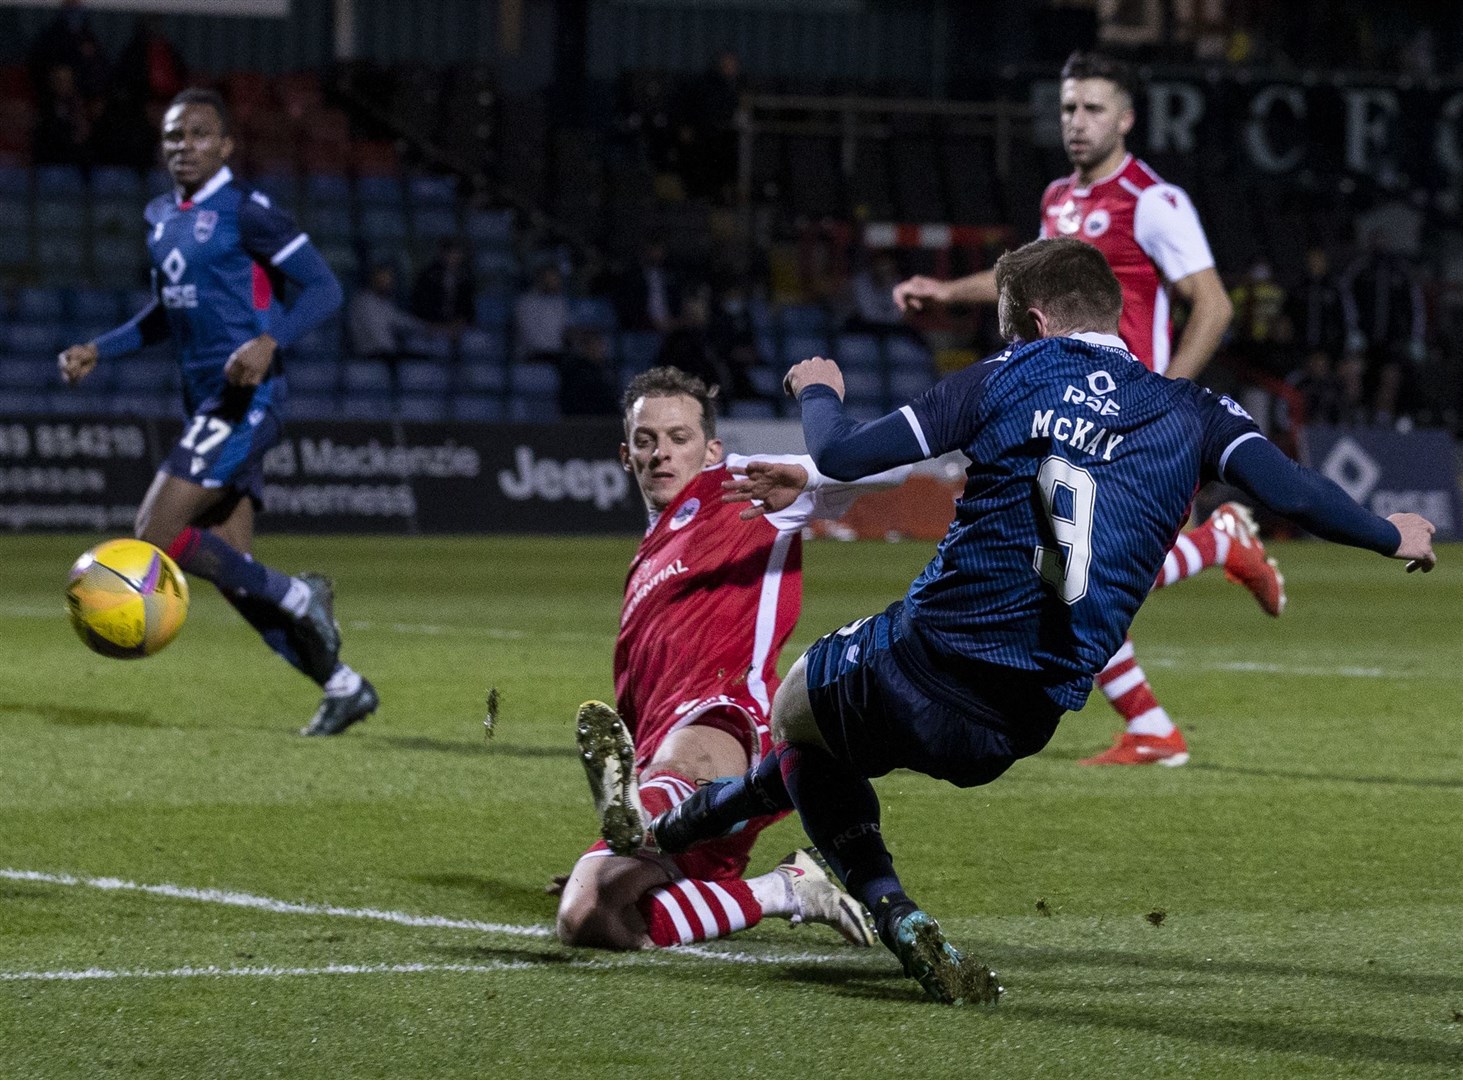 Picture - Ken Macpherson, Inverness. Betfred Cup Group stage. Ross County(3) v Stirling Albion(0). 14.11.20. Ross County's Billy McKay sees his shot beat Stirling 'keeper Cammy Binnies but go just wide of the far post.